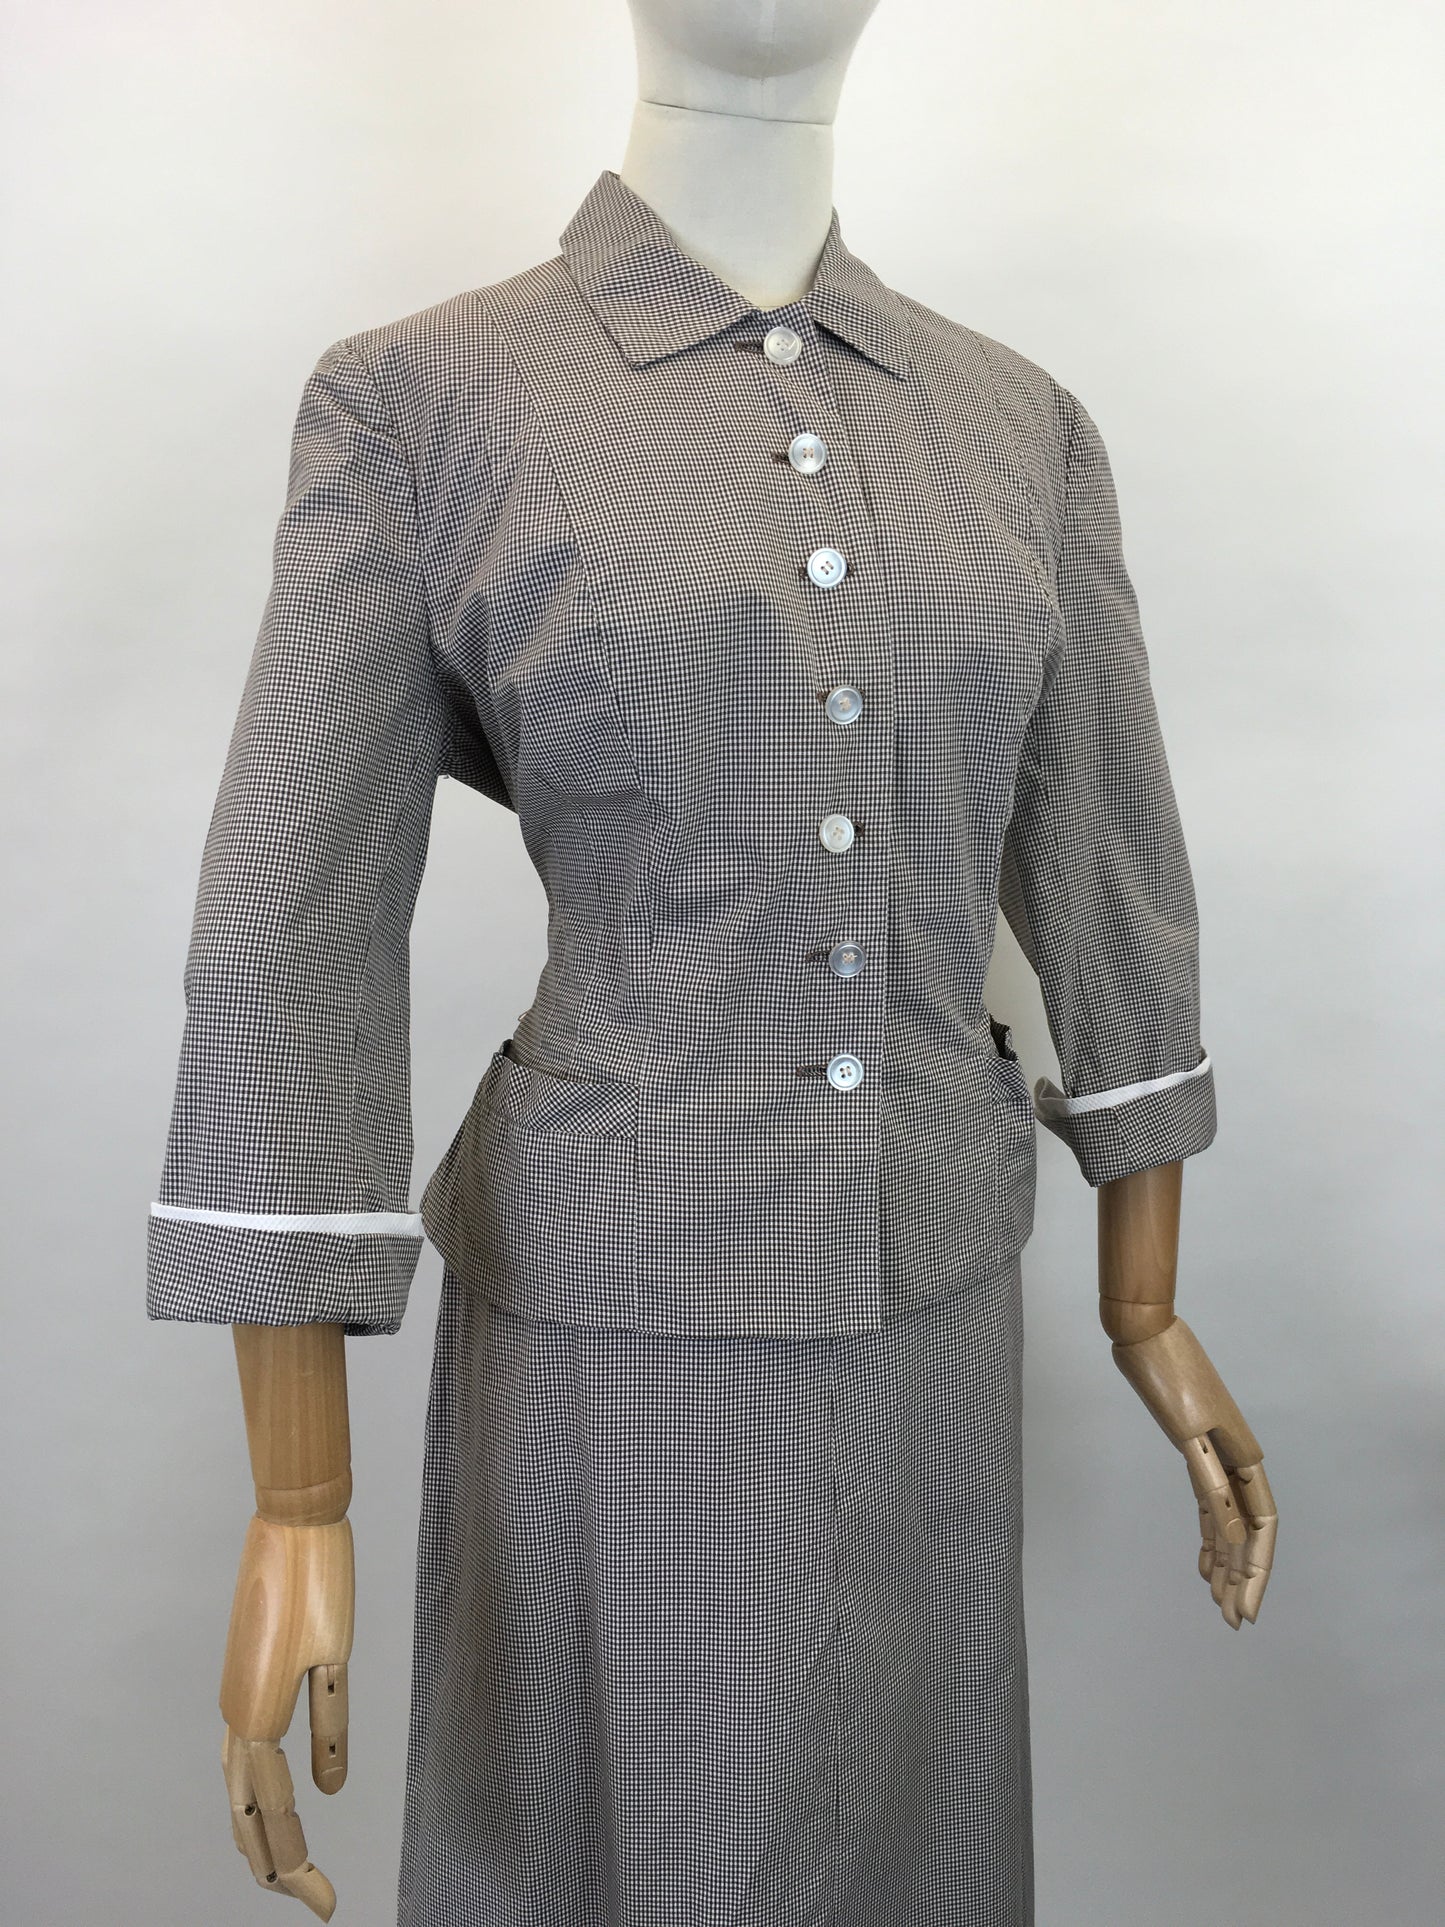 Original 1950’s ‘ Glenhaven ‘ Summer Suit - In A Brown and White Gingham Check